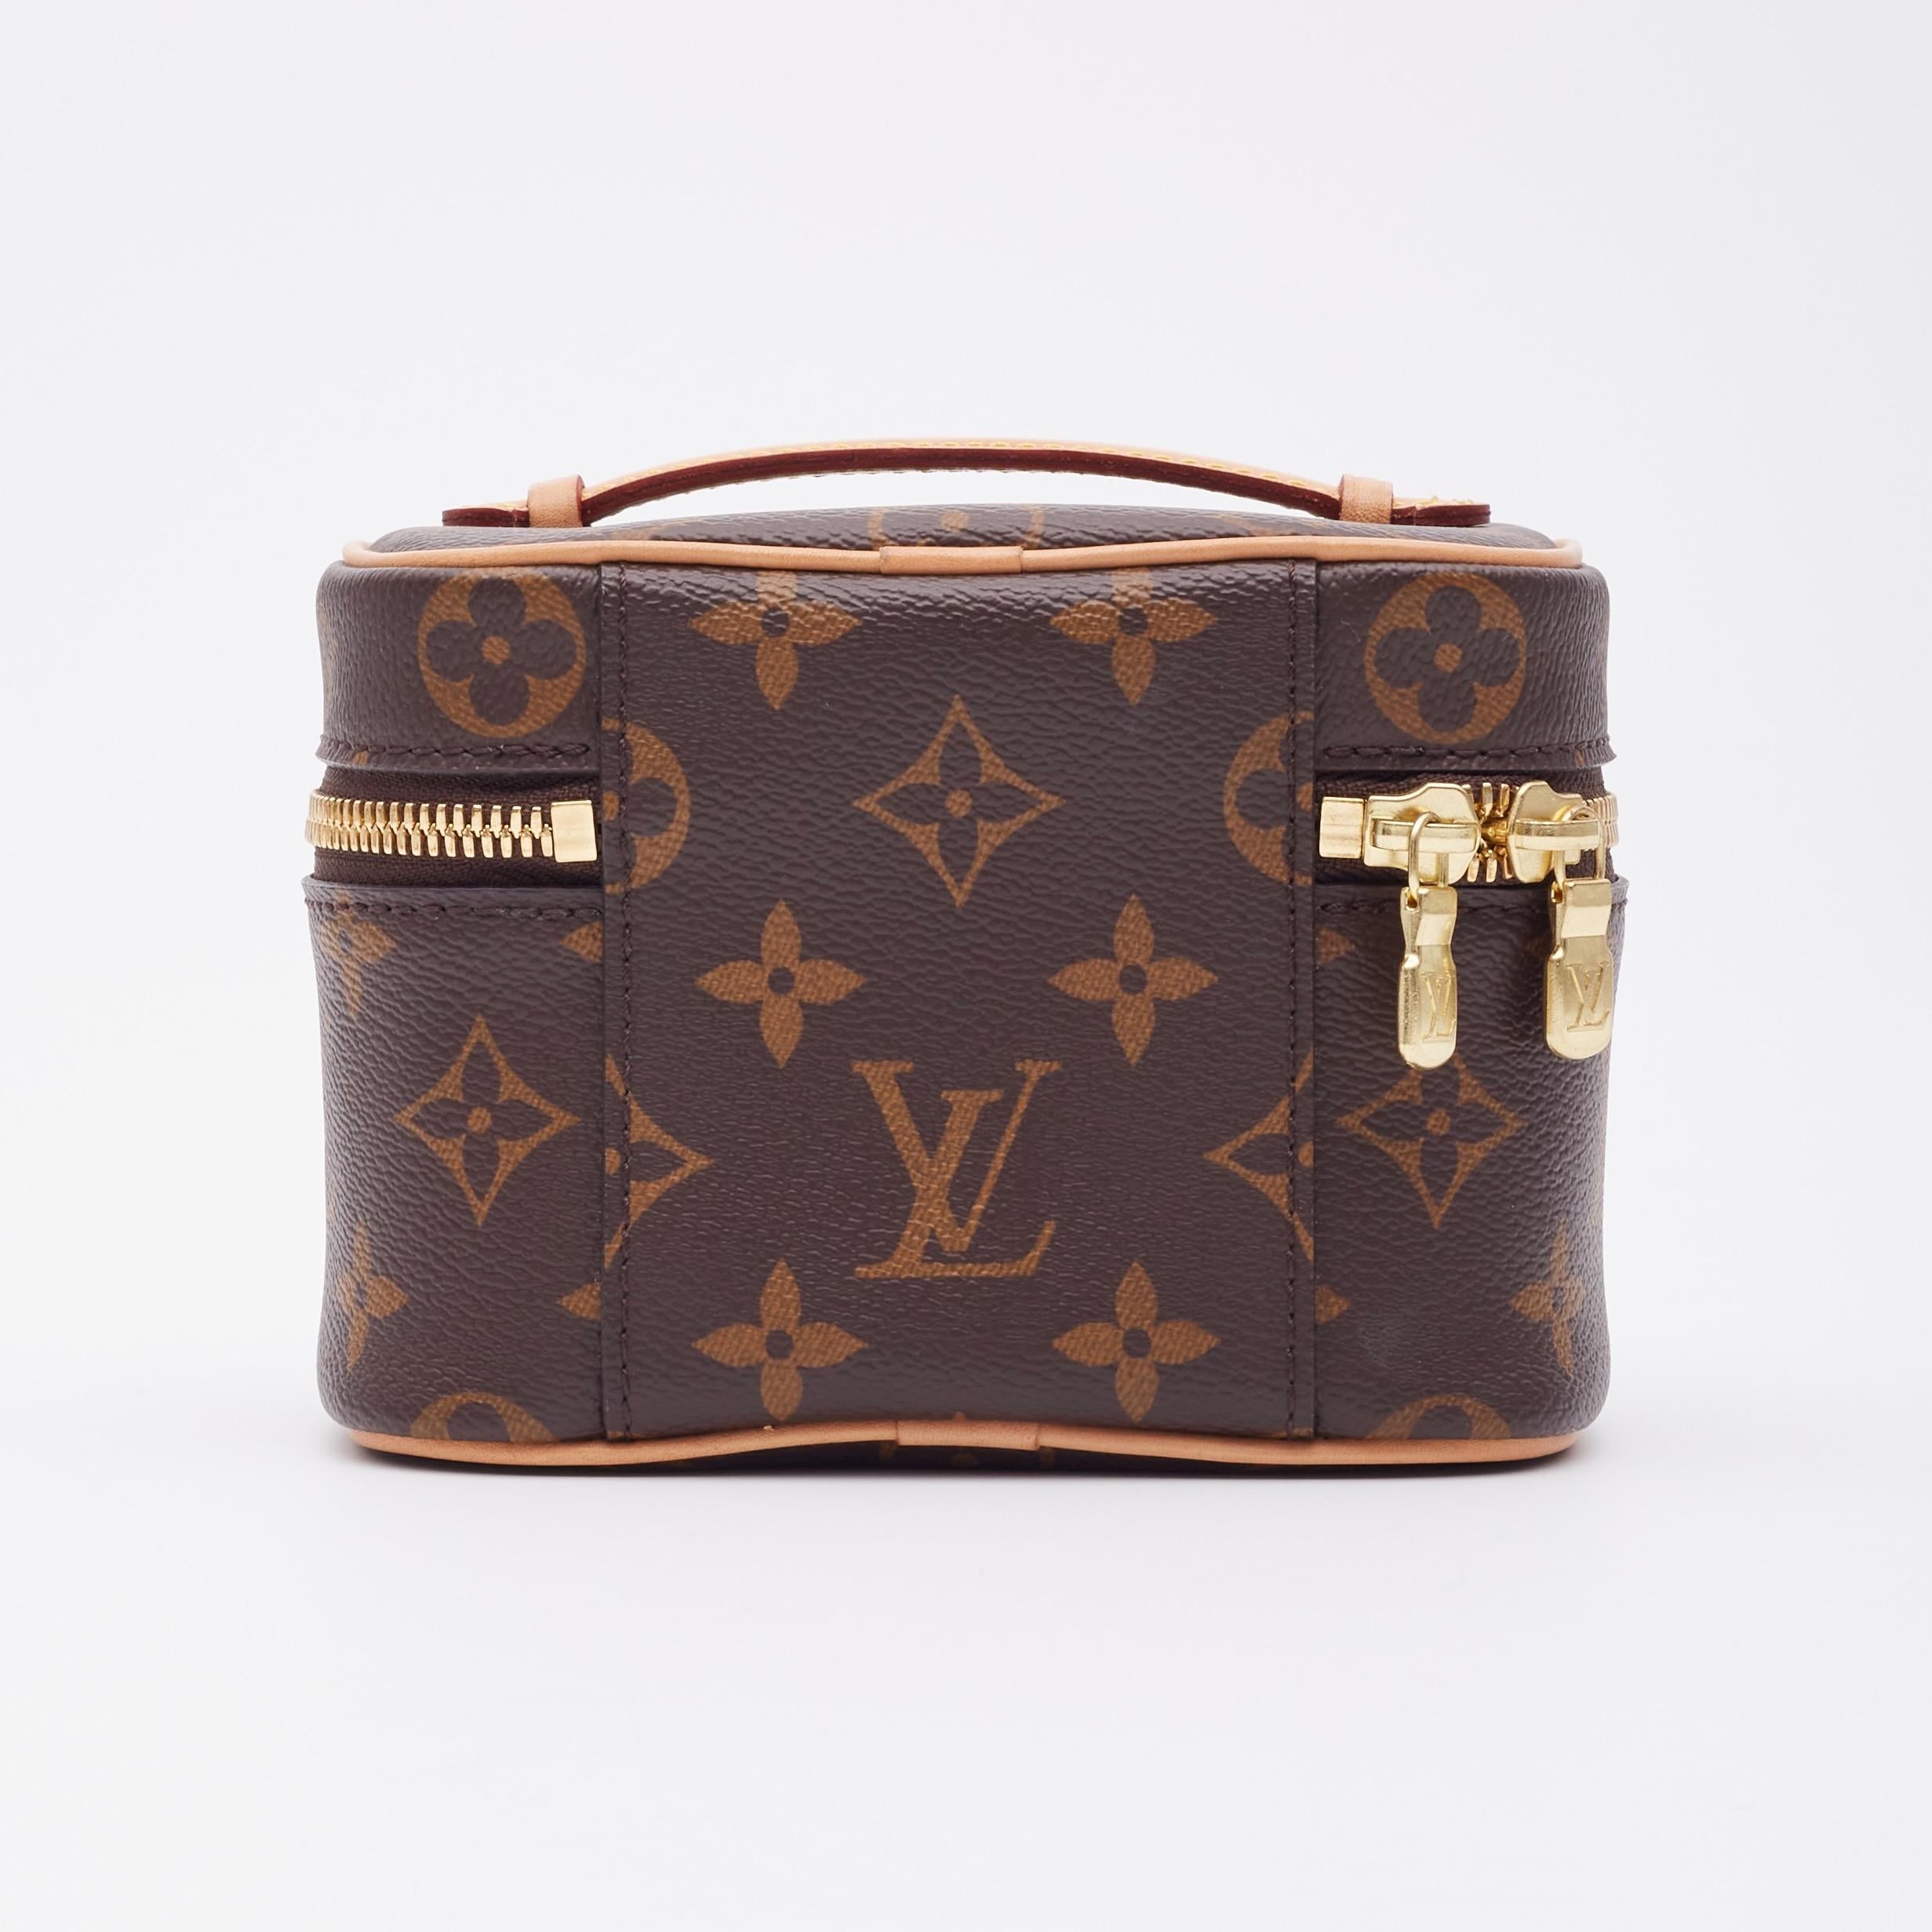 Louis Vuitton Monogram Nano Nice Toiletry Mini Bag In Excellent Condition For Sale In Montreal, Quebec